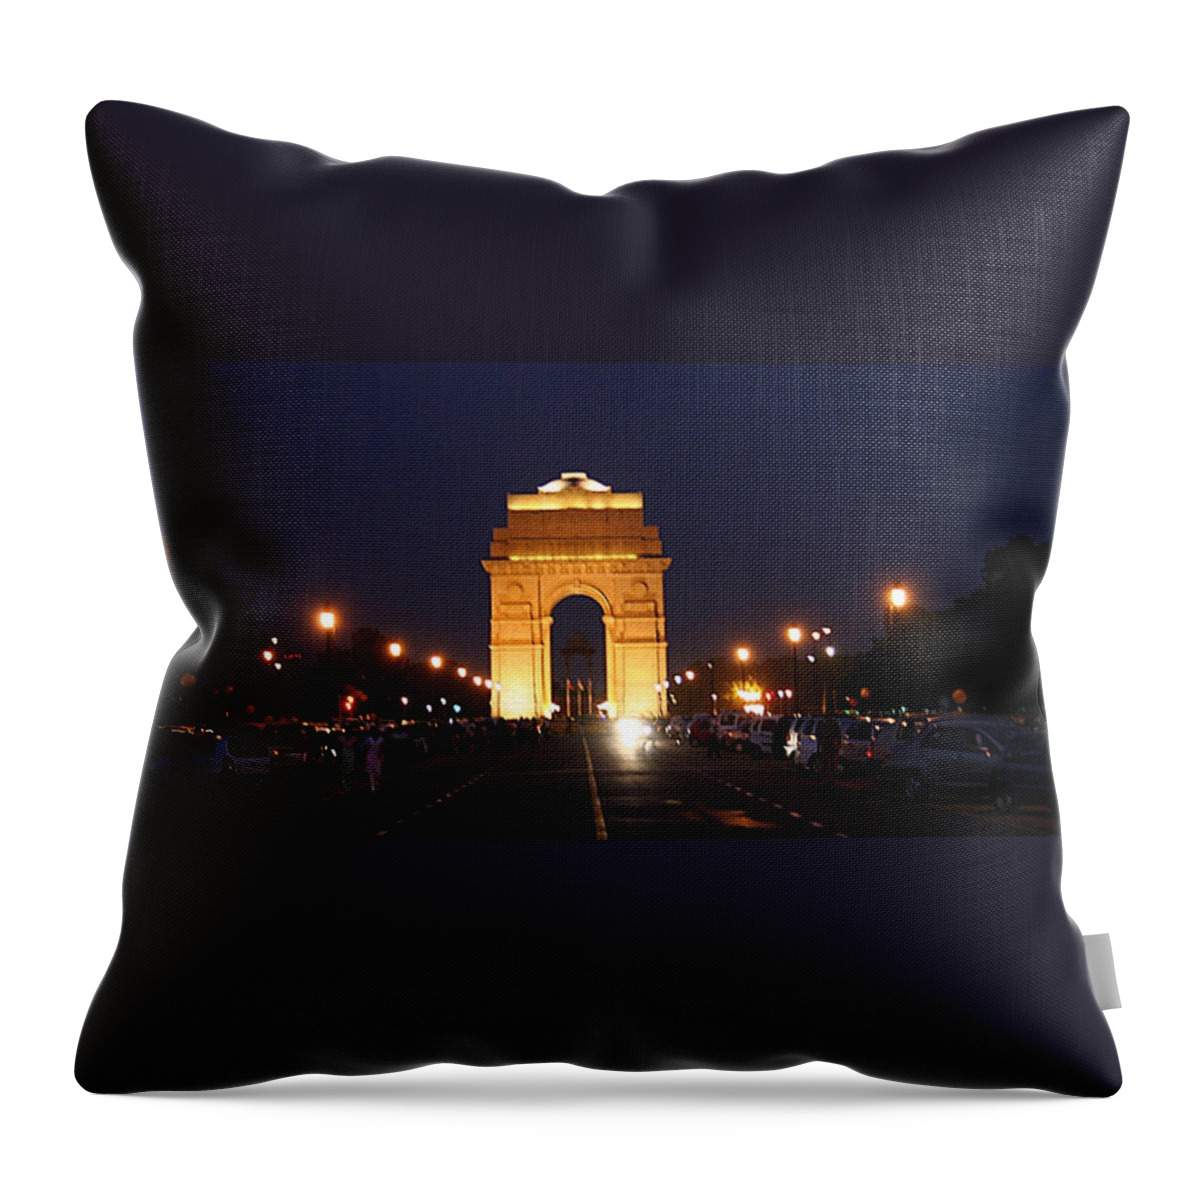 Arch Throw Pillow featuring the photograph India Gate At Night by Ramesh Lalwani